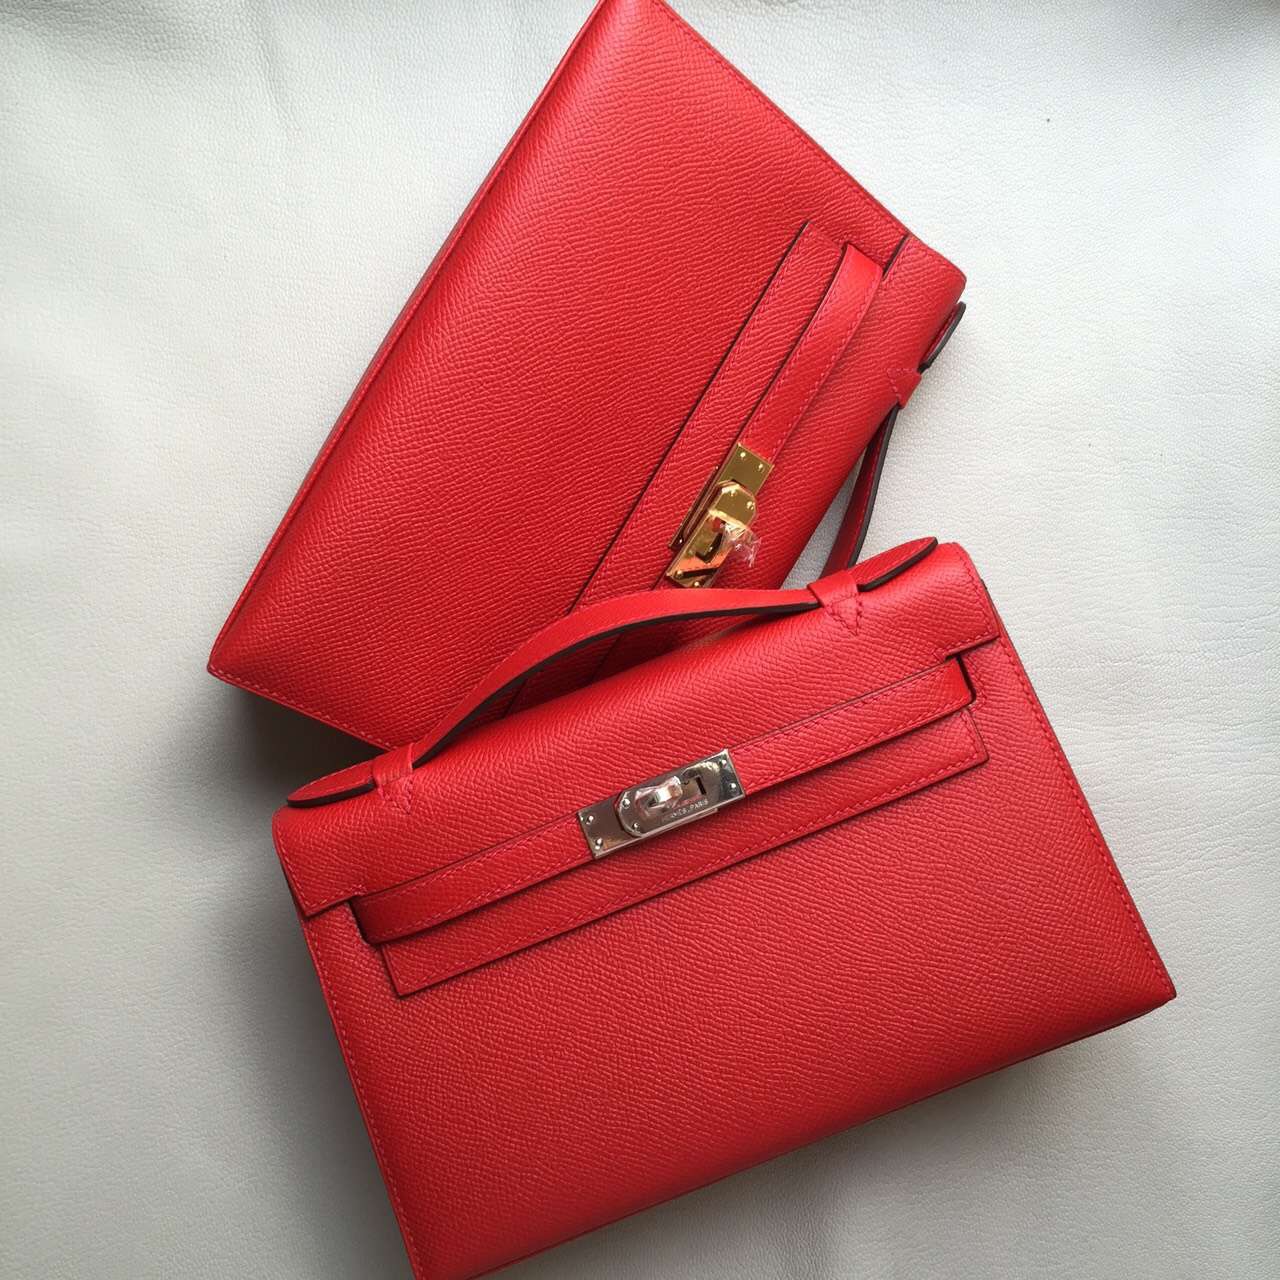 Discount Hermes Q5 Rouge Casaque Epsom Calf Leather Minikelly Clutch Bag 22CM